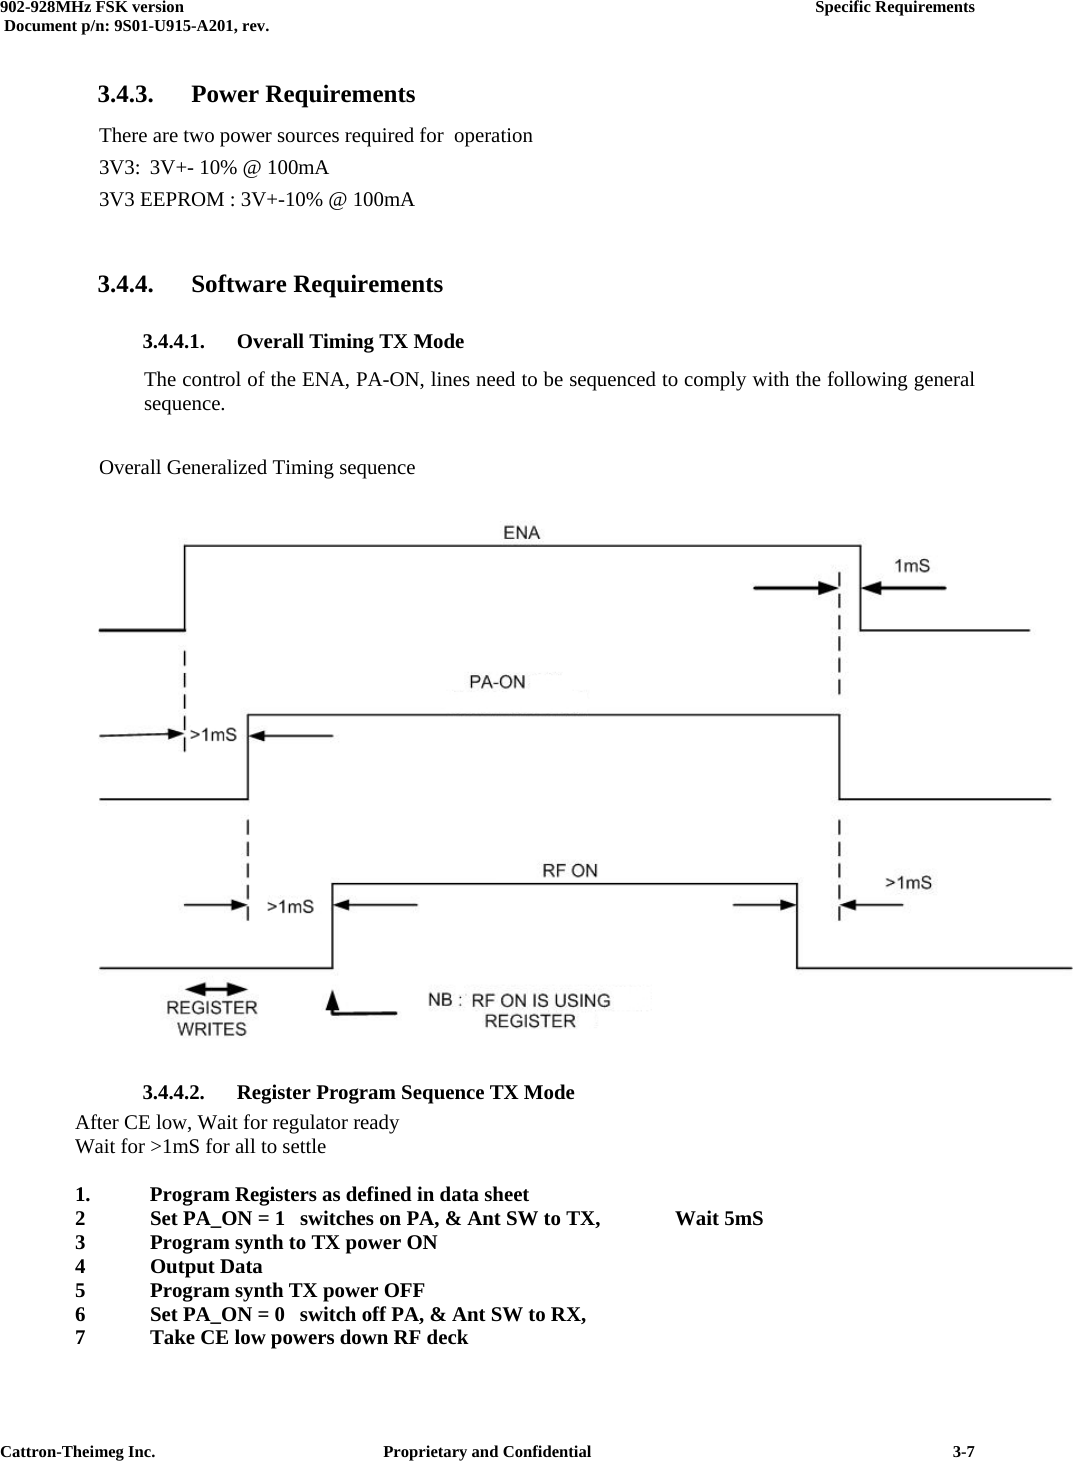  902-928MHz FSK version      Specific Requirements   Document p/n: 9S01-U915-A201, rev.   Cattron-Theimeg Inc.  Proprietary and Confidential   3-73.4.3. Power Requirements There are two power sources required for  operation 3V3:  3V+- 10% @ 100mA 3V3 EEPROM : 3V+-10% @ 100mA  3.4.4. Software Requirements 3.4.4.1.  Overall Timing TX Mode The control of the ENA, PA-ON, lines need to be sequenced to comply with the following general sequence.   Overall Generalized Timing sequence   3.4.4.2.  Register Program Sequence TX Mode   After CE low, Wait for regulator ready    Wait for &gt;1mS for all to settle    1.   Program Registers as defined in data sheet   2  Set PA_ON = 1  switches on PA, &amp; Ant SW to TX,   Wait 5mS   3  Program synth to TX power ON   4 Output Data   5  Program synth TX power OFF    6  Set PA_ON = 0  switch off PA, &amp; Ant SW to RX,   7  Take CE low powers down RF deck 